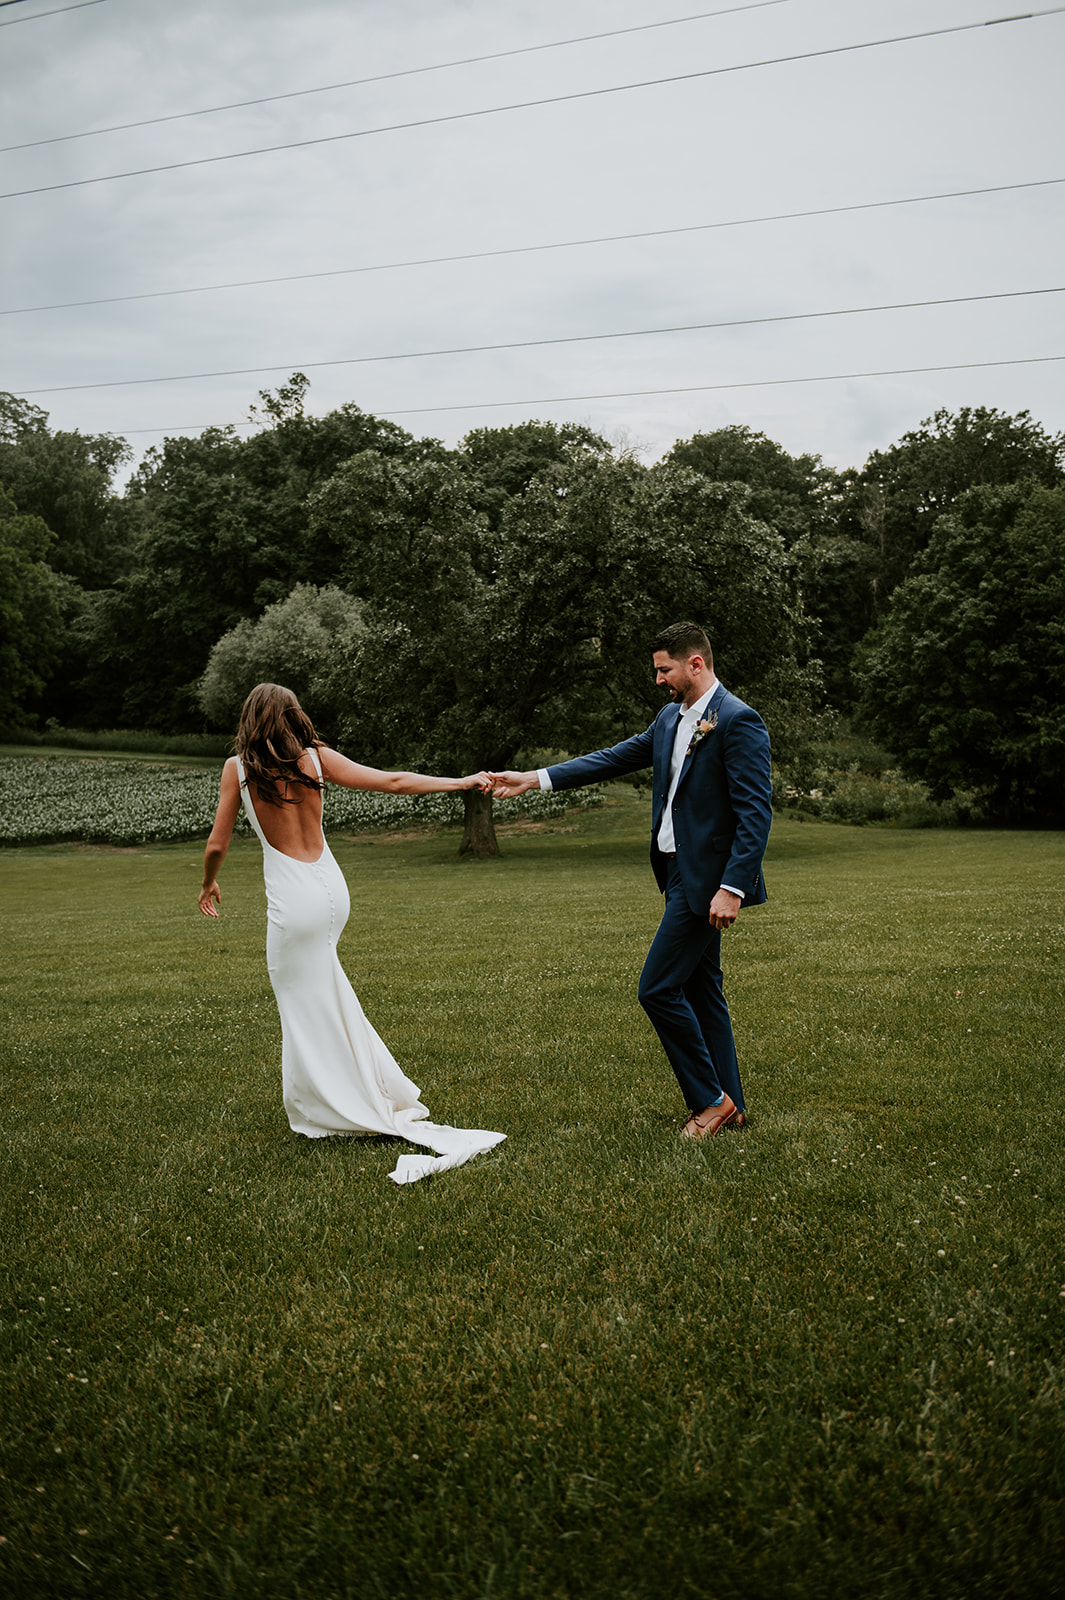 Groom spinning bride during first look in a field